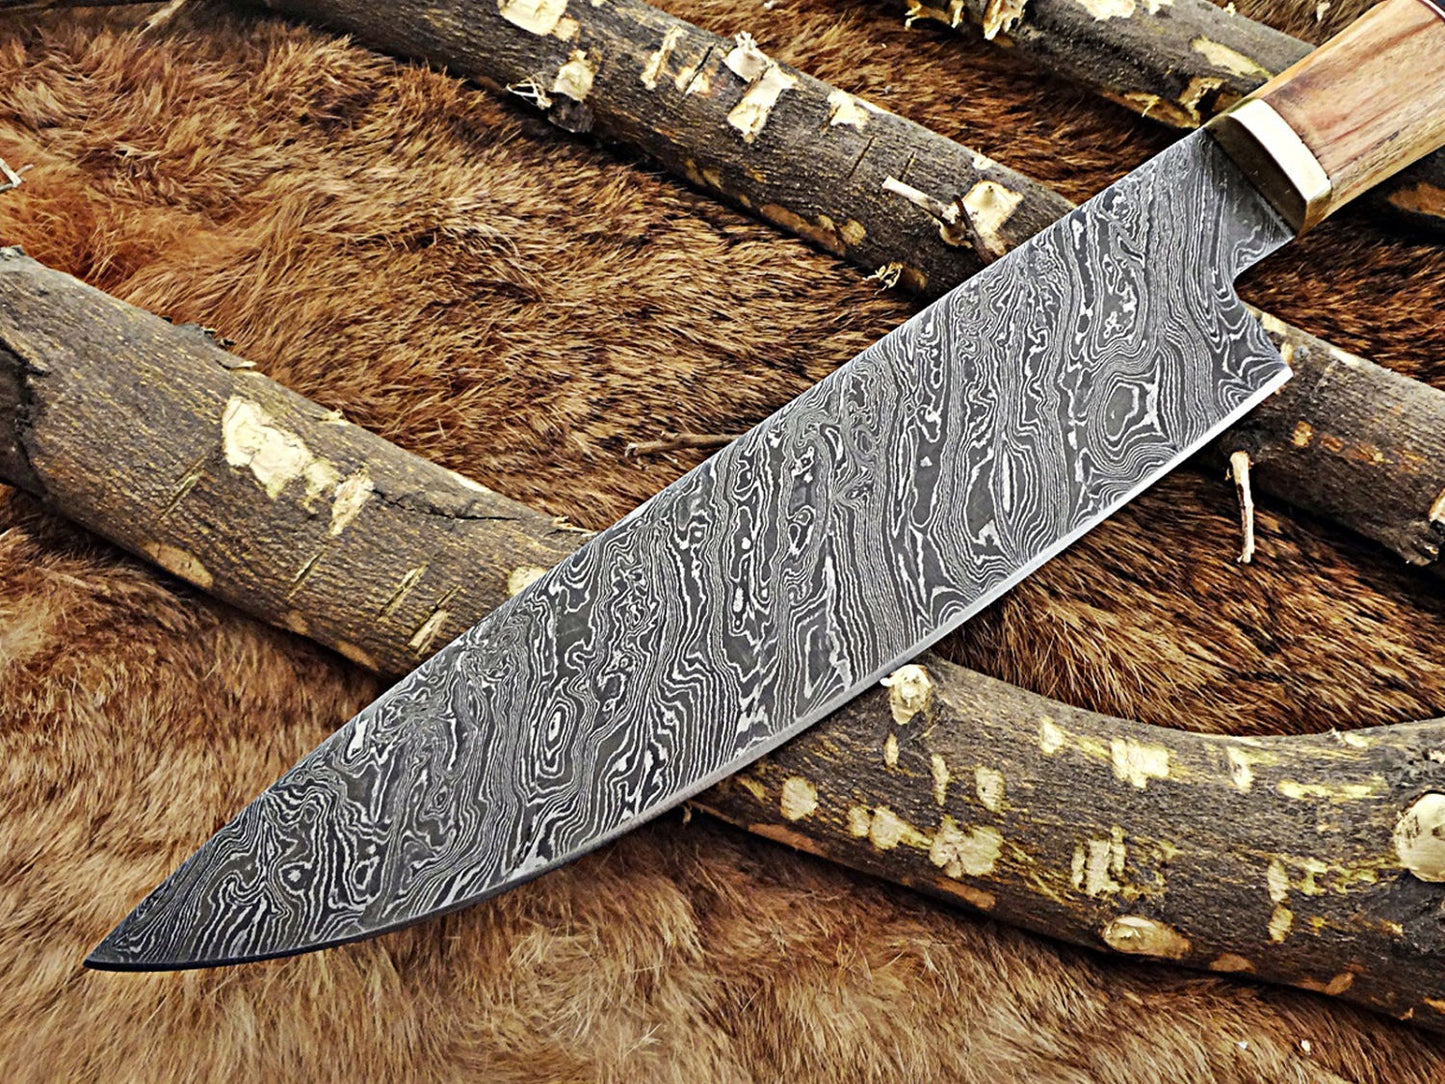 14 Inches long custom made Damascus steel chef Knife 9" full tang blade Kow wood scale with brass spacer and bull horn round scale